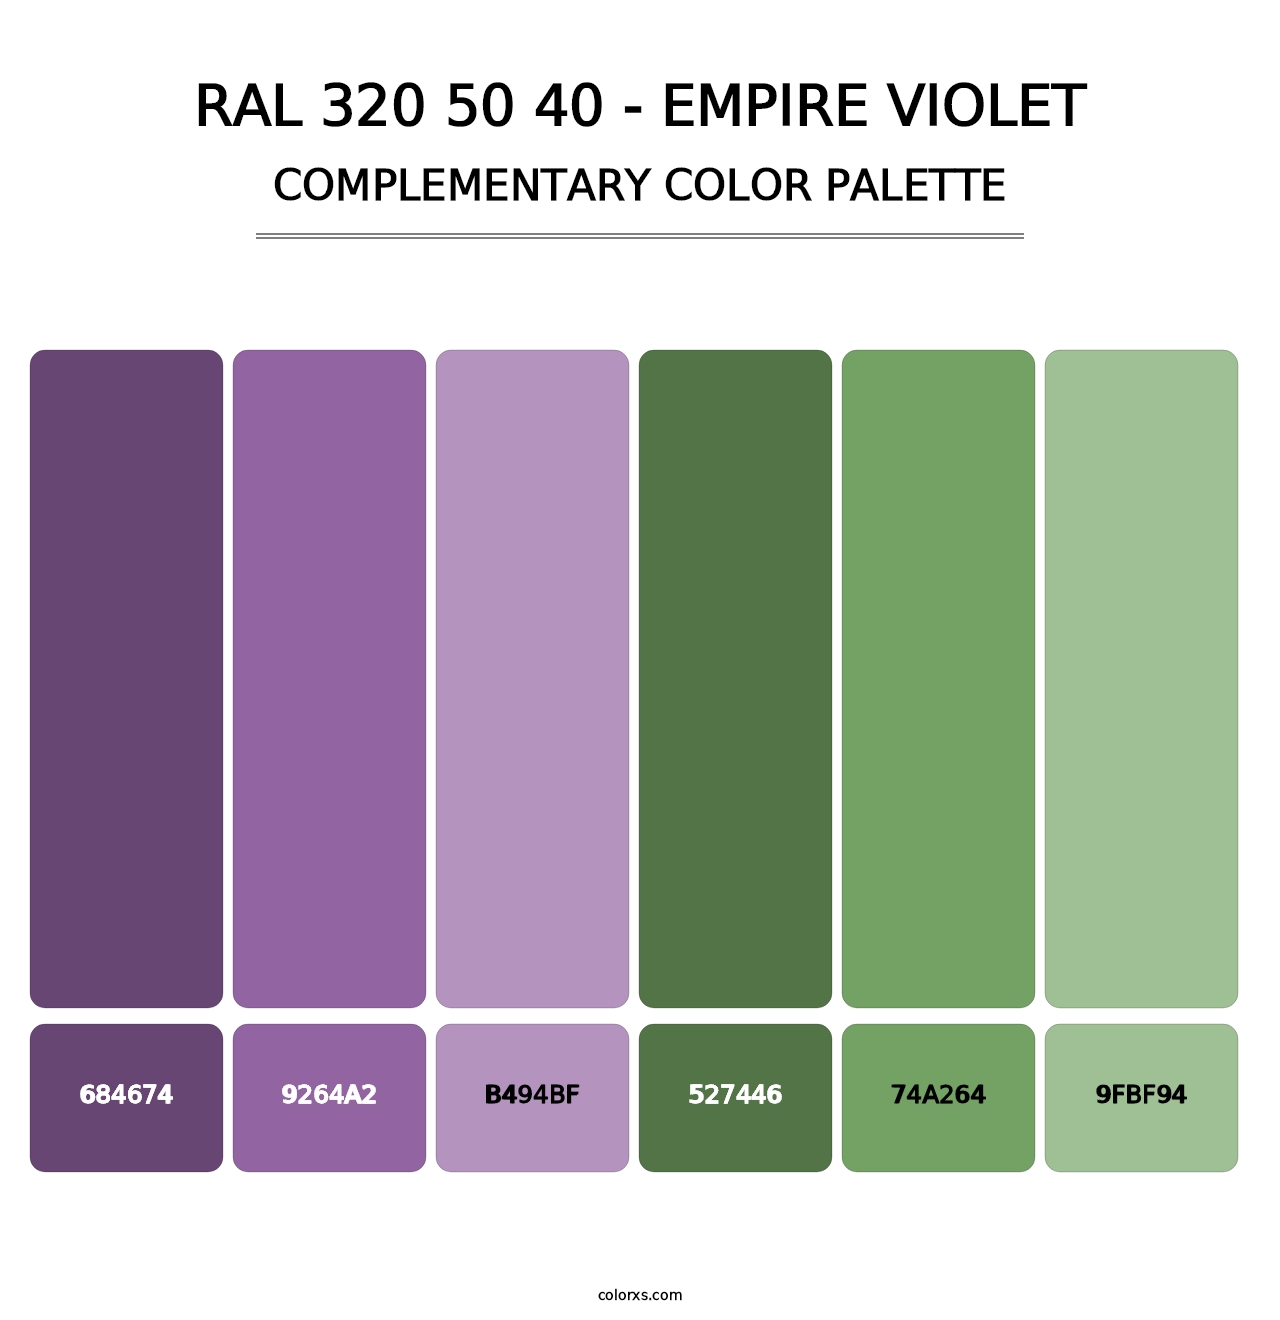 RAL 320 50 40 - Empire Violet - Complementary Color Palette